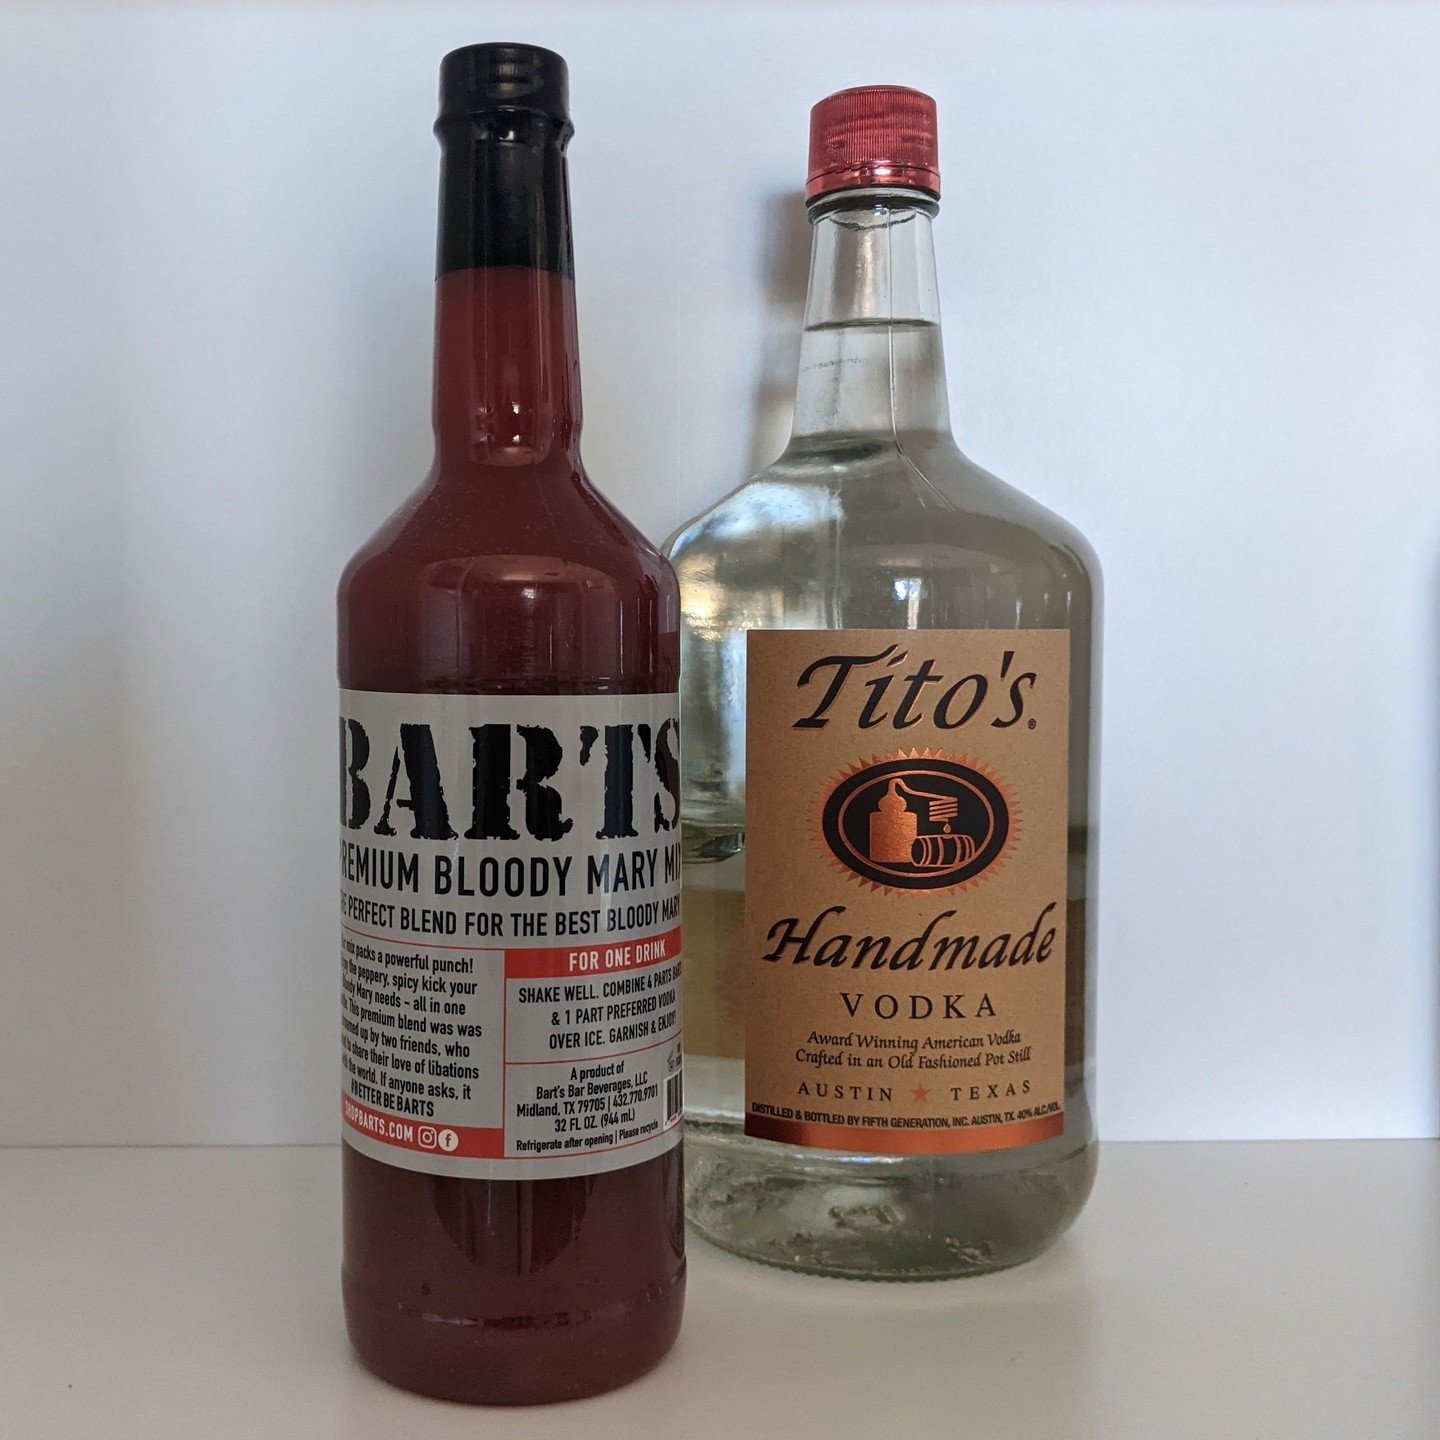 MIX things up with Barts Bloody Mary Mix! Forget that chemical taste from the neon-green label you always see at the store. Try our hand-made, Texas-made, made-with-love mix! Shop at our link in bio. #bartsbloodymary #betterbebarts #shopsmall #drinkl